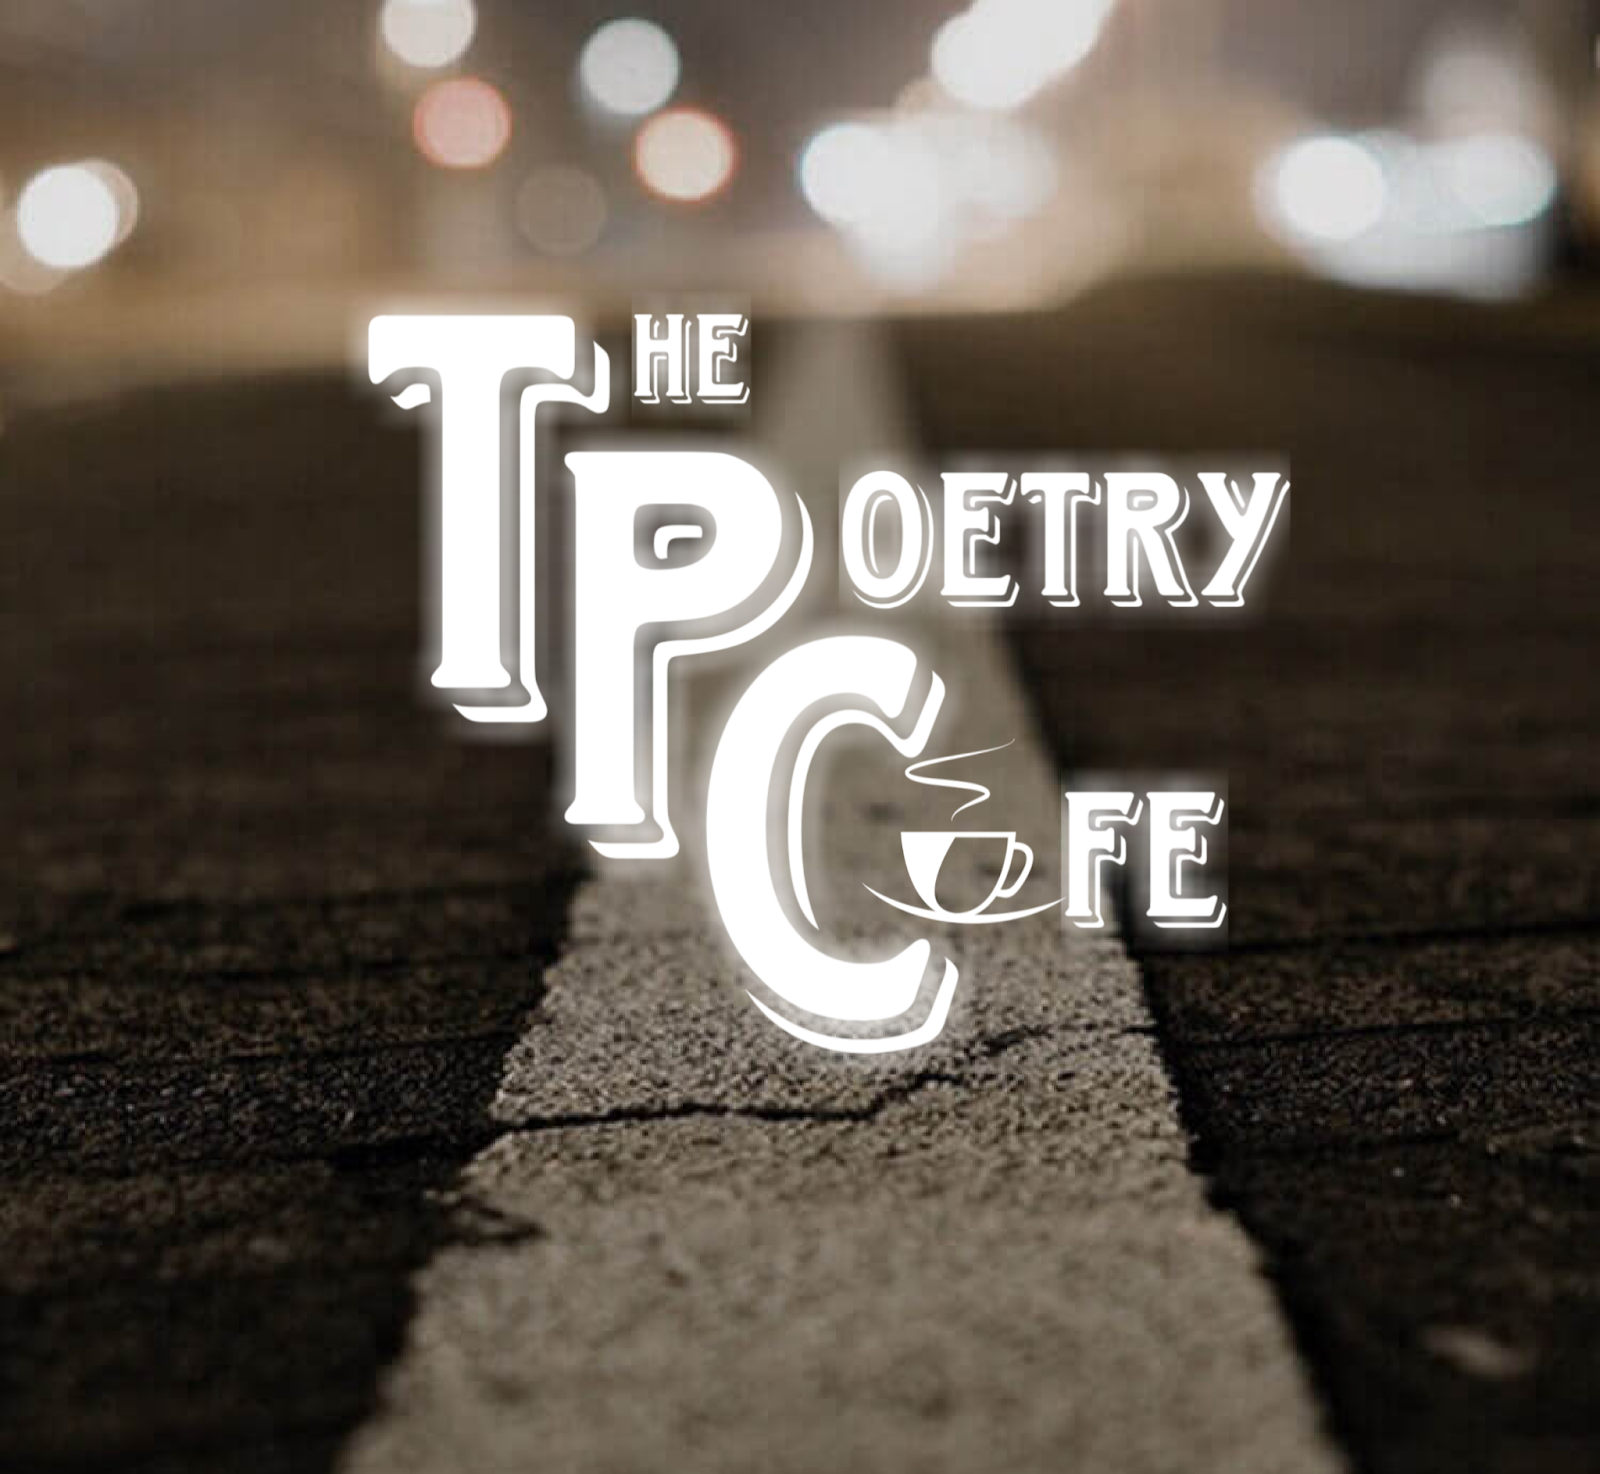 Thepoetrycafe